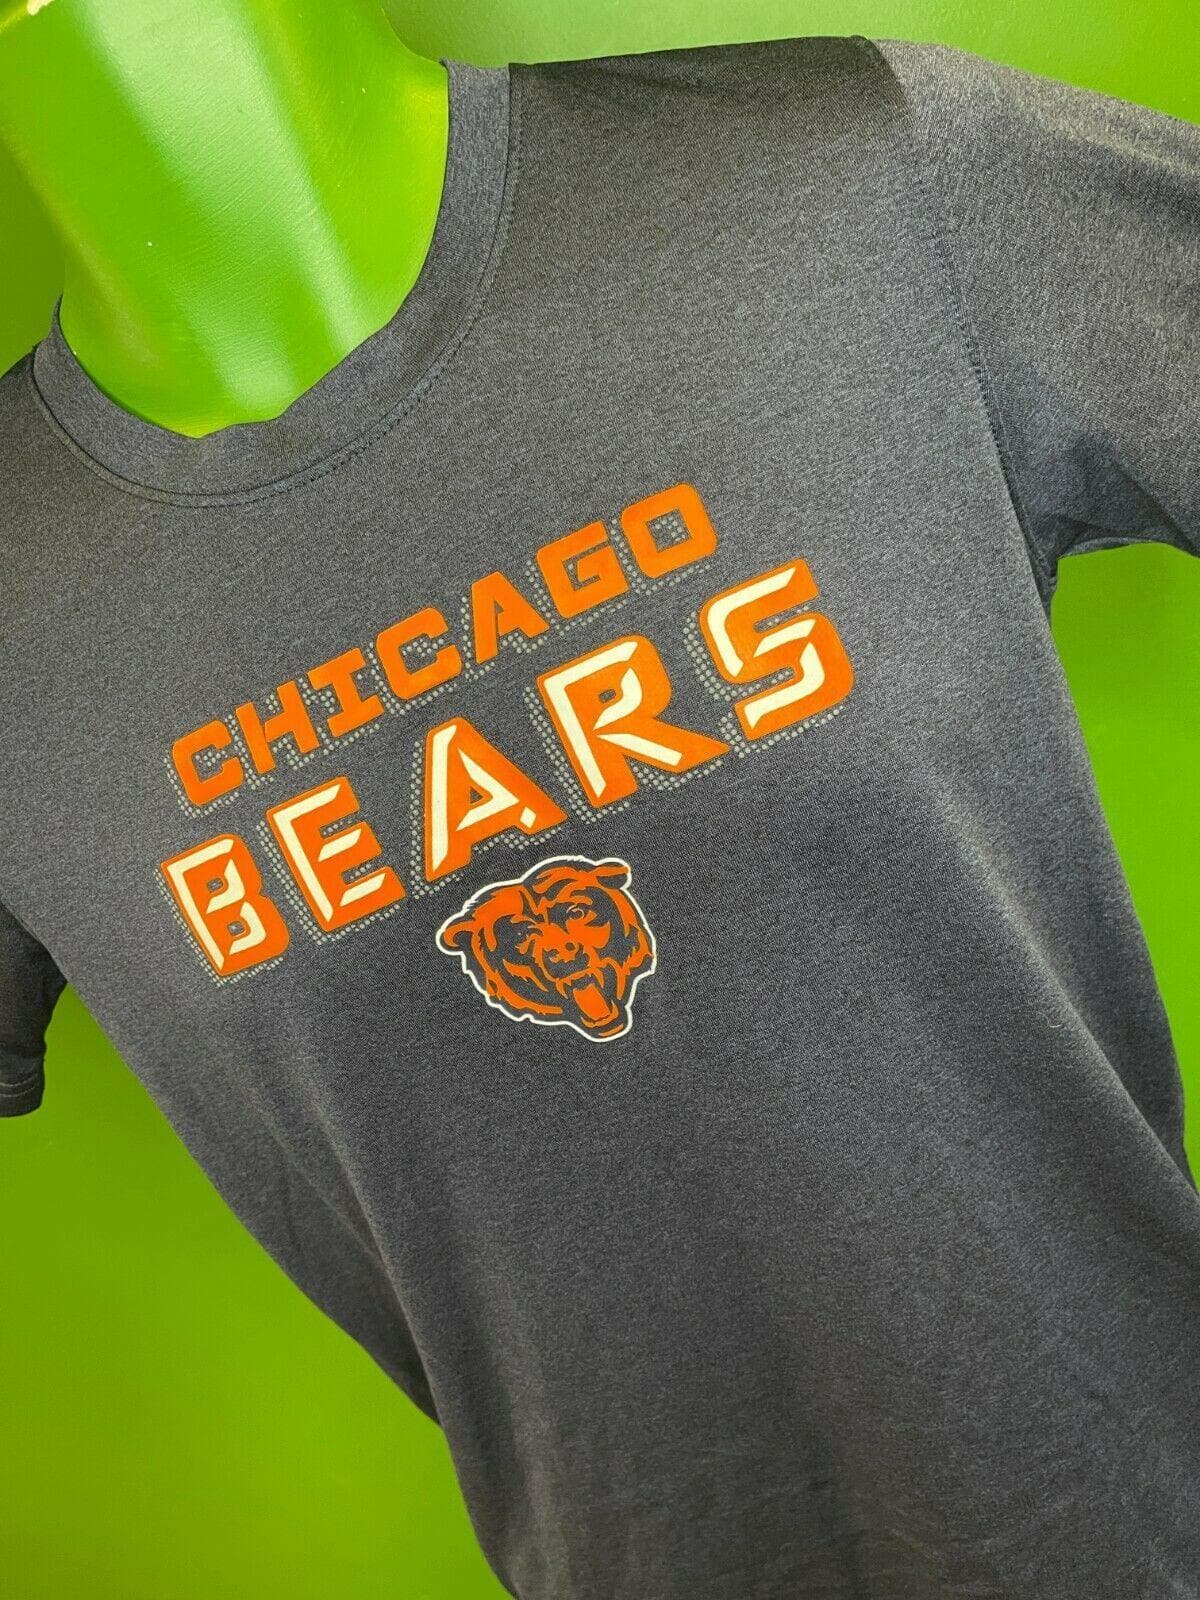 NFL Chicago Bears Grey Wicking T-Shirt Youth Large 14-16